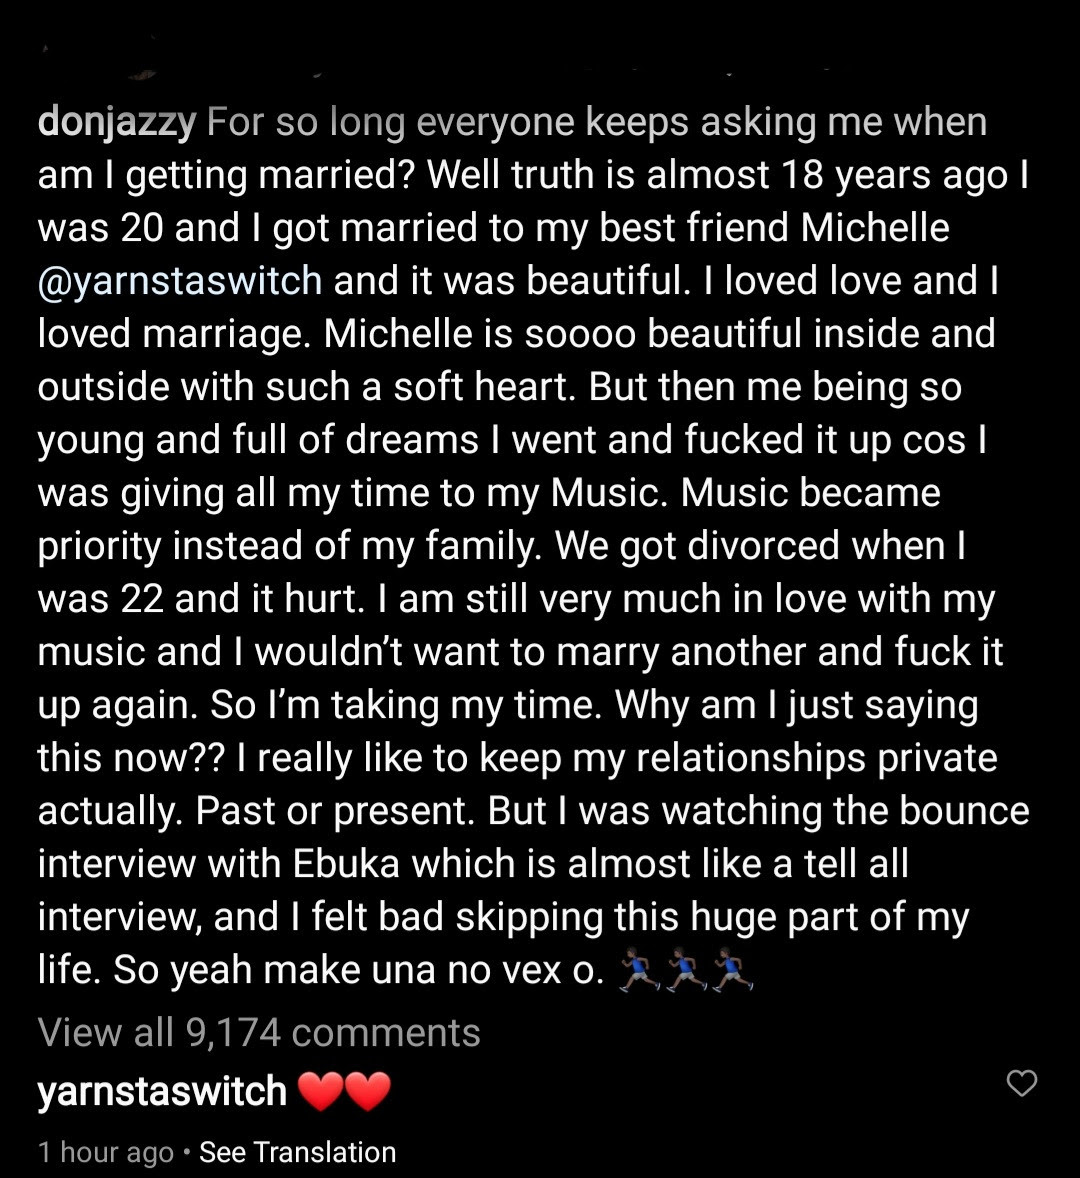   Don Jazzy reveals he was married at age 20 to model, Michelle Jackson, and explains why it ended in divorce